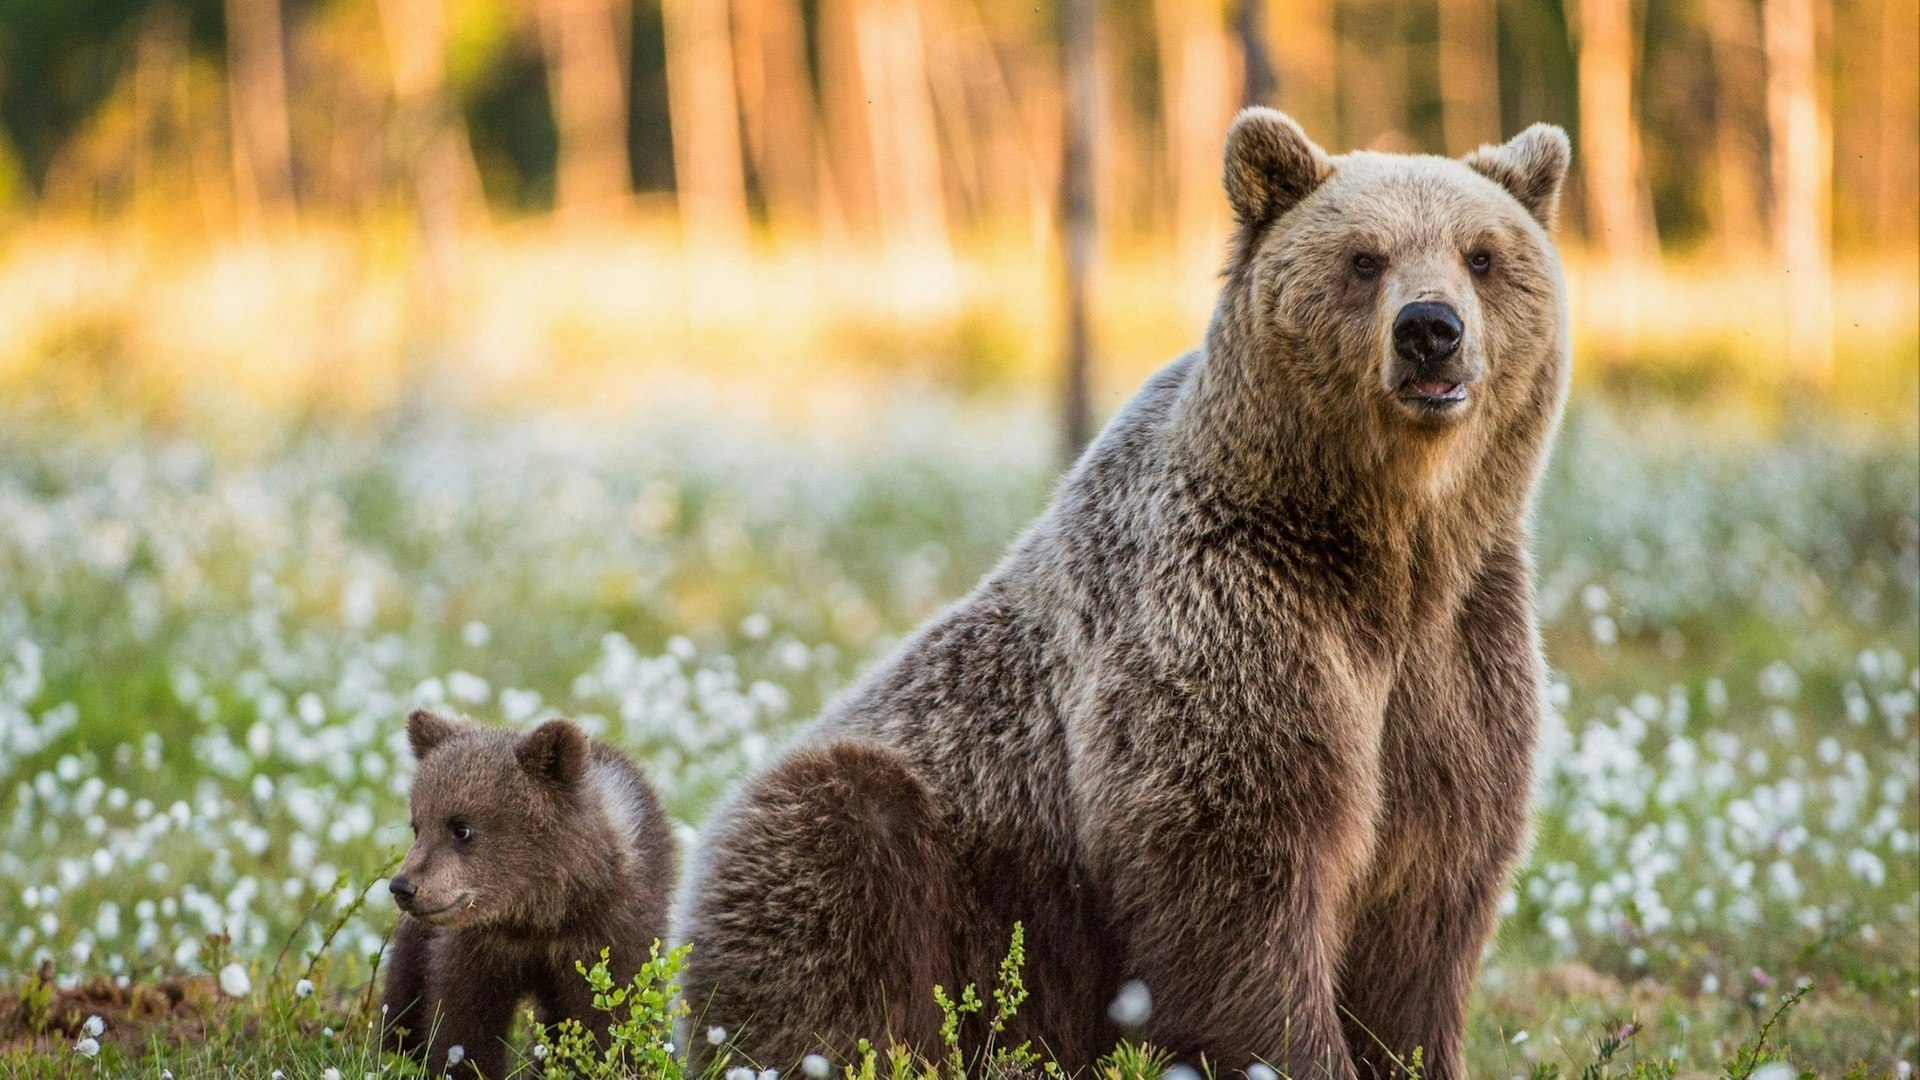 Cub and Adult female of Brown Bear in the forest at summer time